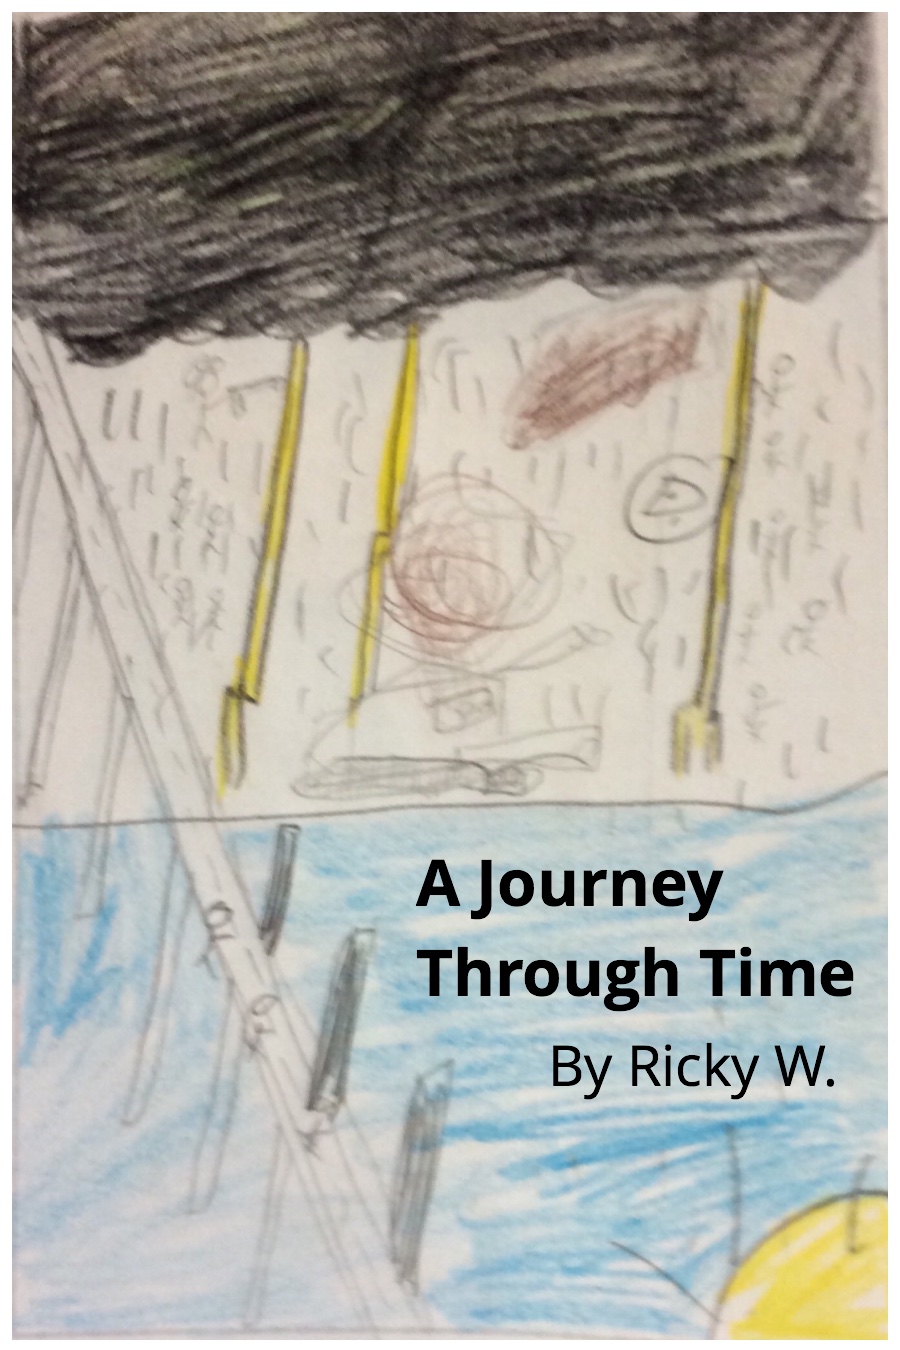 A Journey Through Time by Ricky W